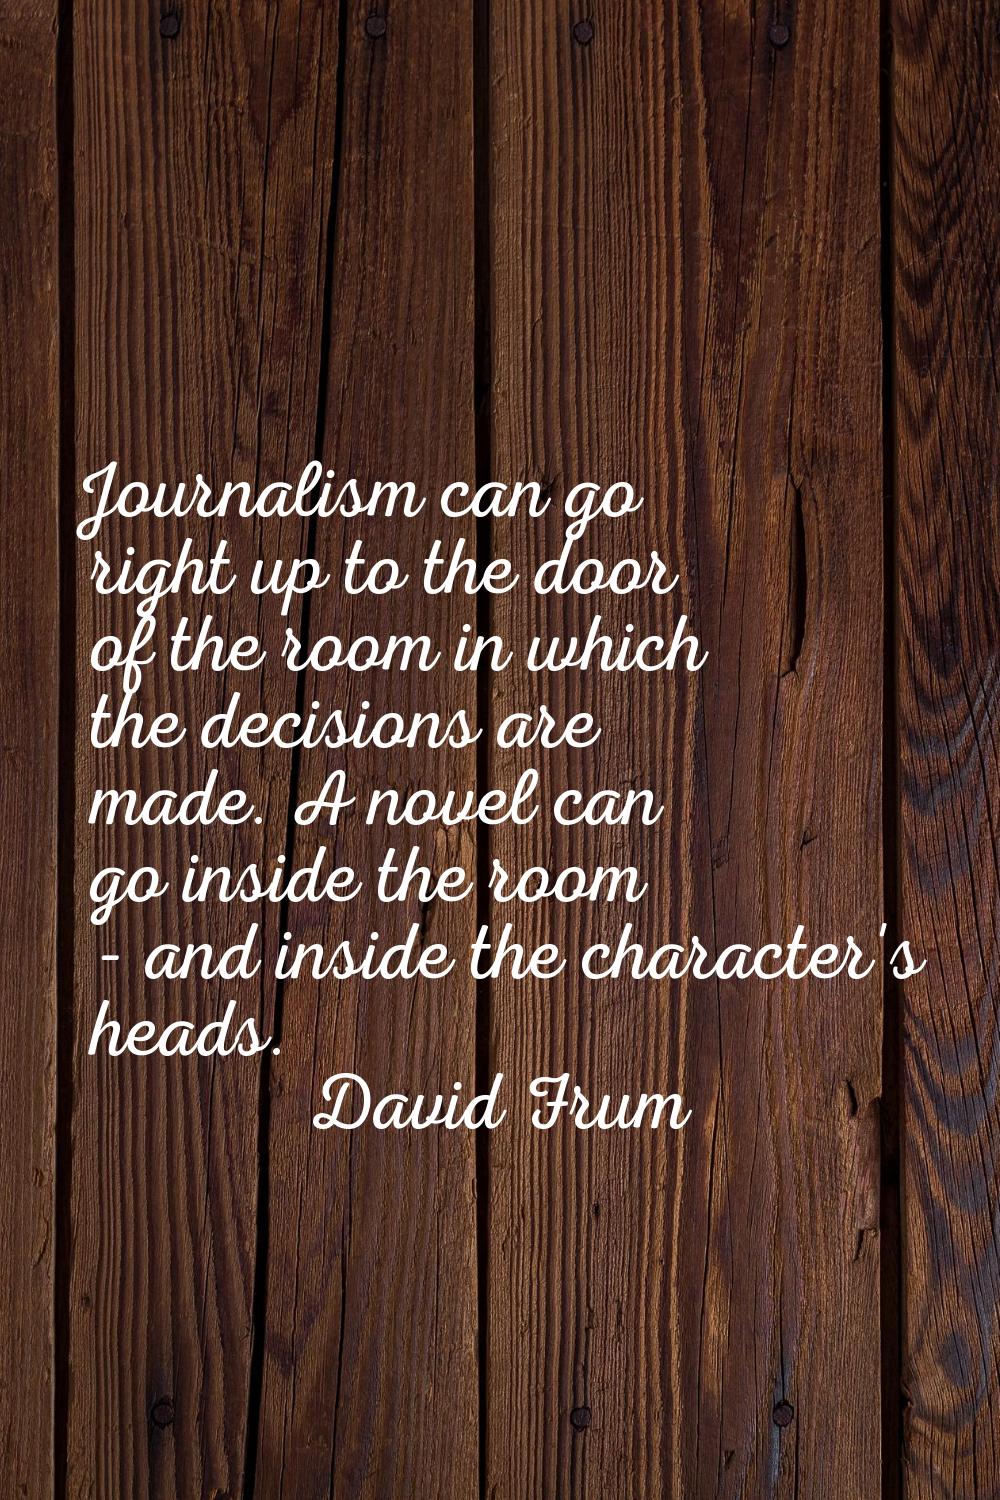 Journalism can go right up to the door of the room in which the decisions are made. A novel can go 